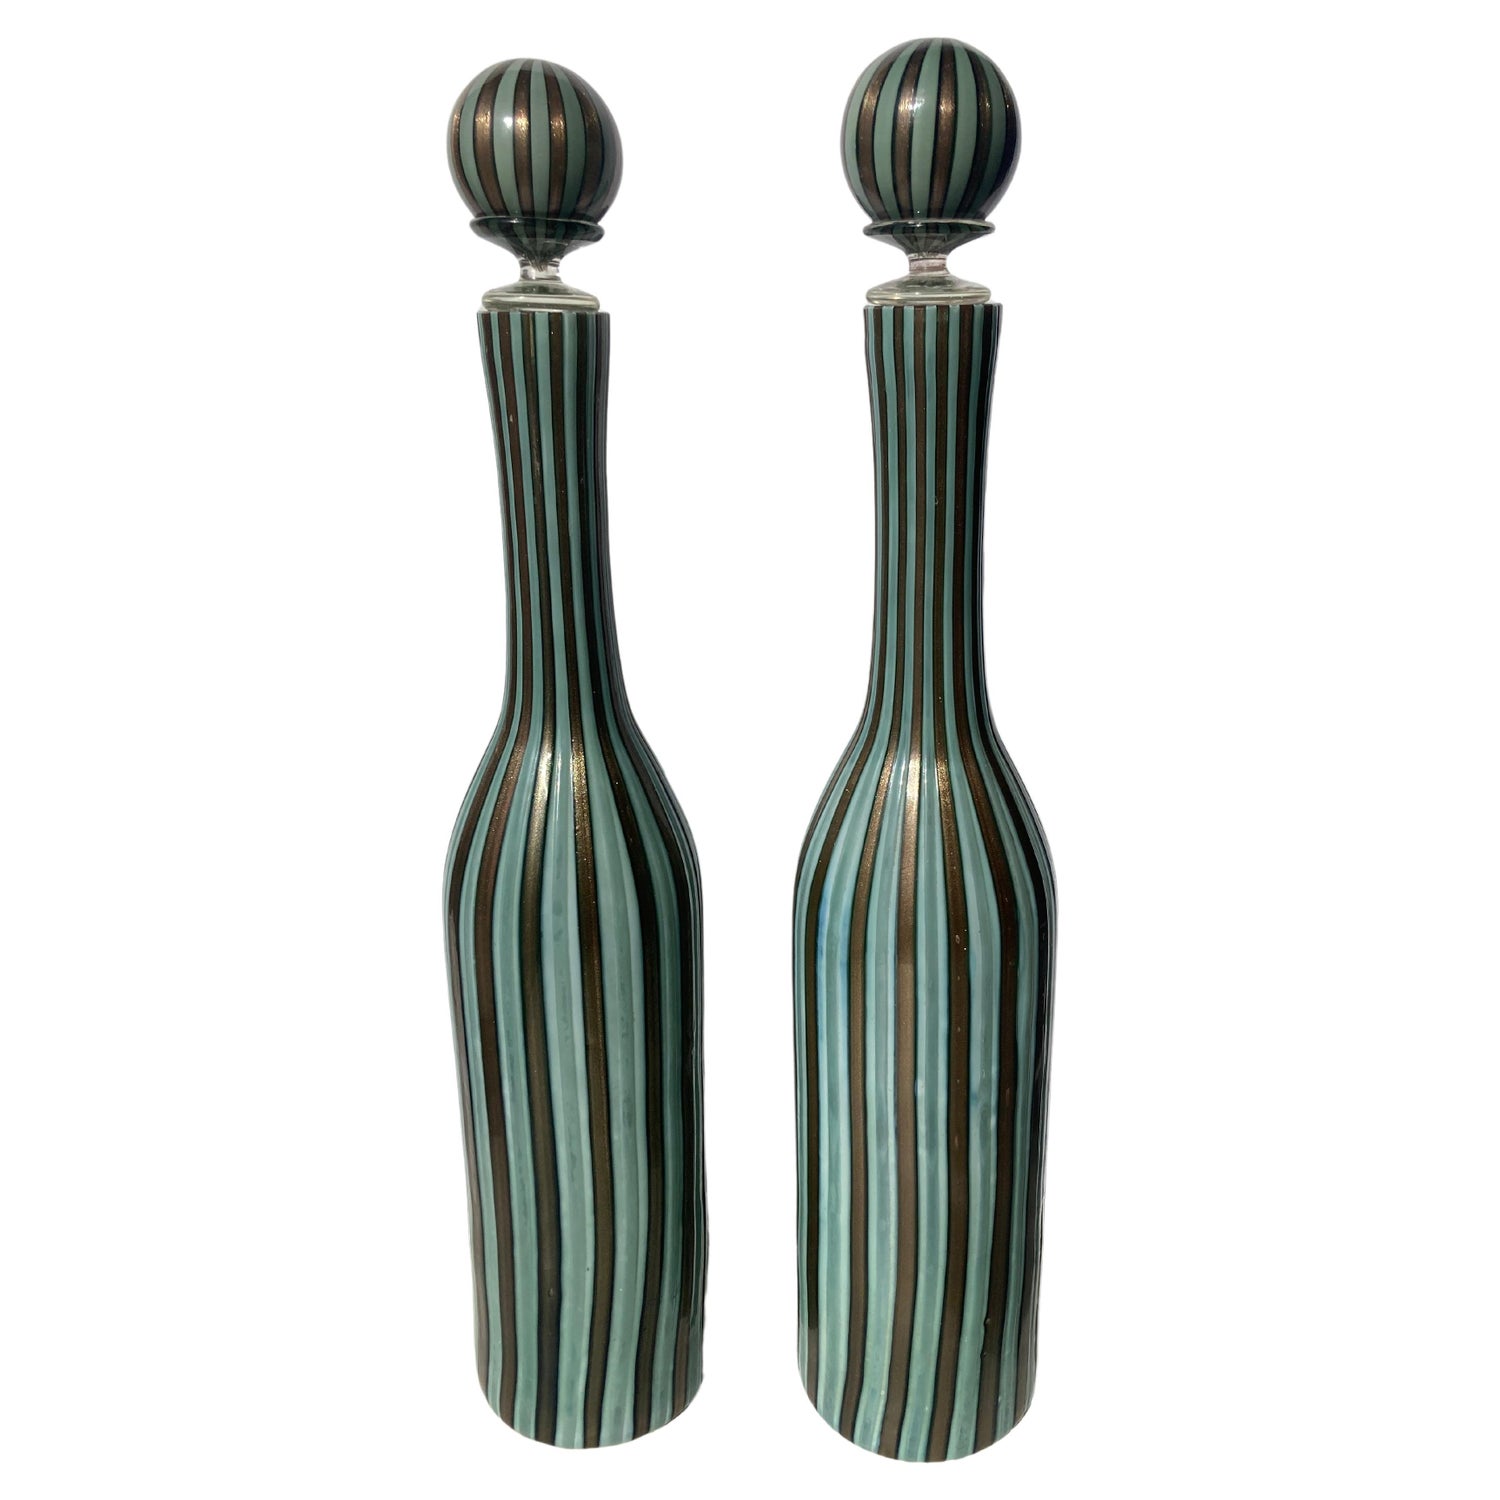 https://a.1stdibscdn.com/fratelli-toso-pair-murano-glass-decanters-bottles-with-stoppers--for-sale/f_8089/f_311867621667782531799/f_31186762_1667782532973_bg_processed.jpg?width=1500